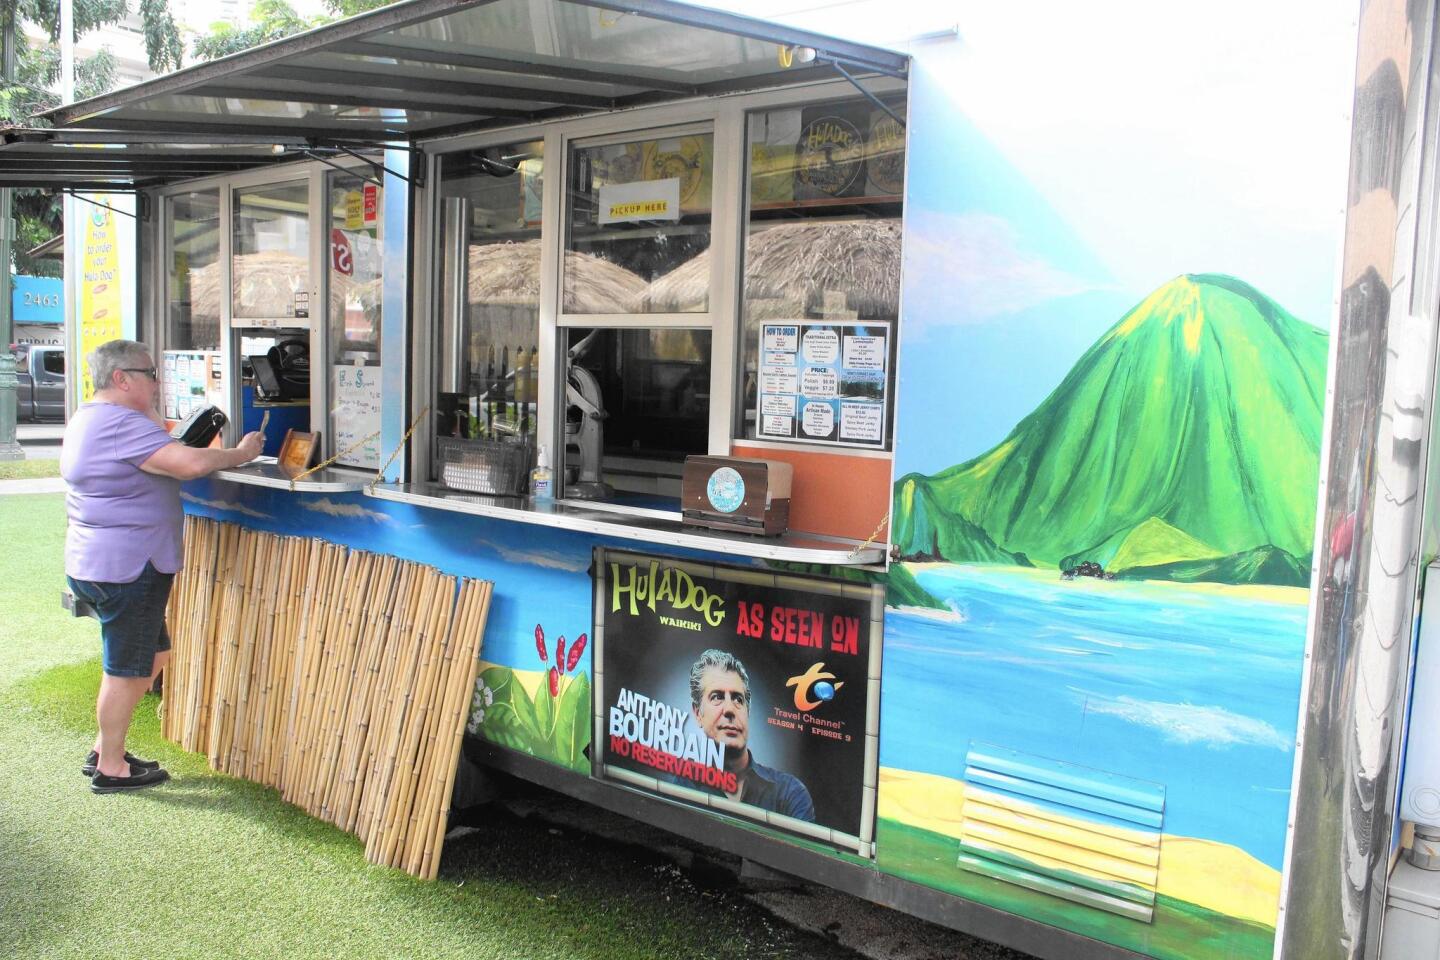 The Hula Dog food truck can be found at 2442 Kuhio Ave., Honolulu.